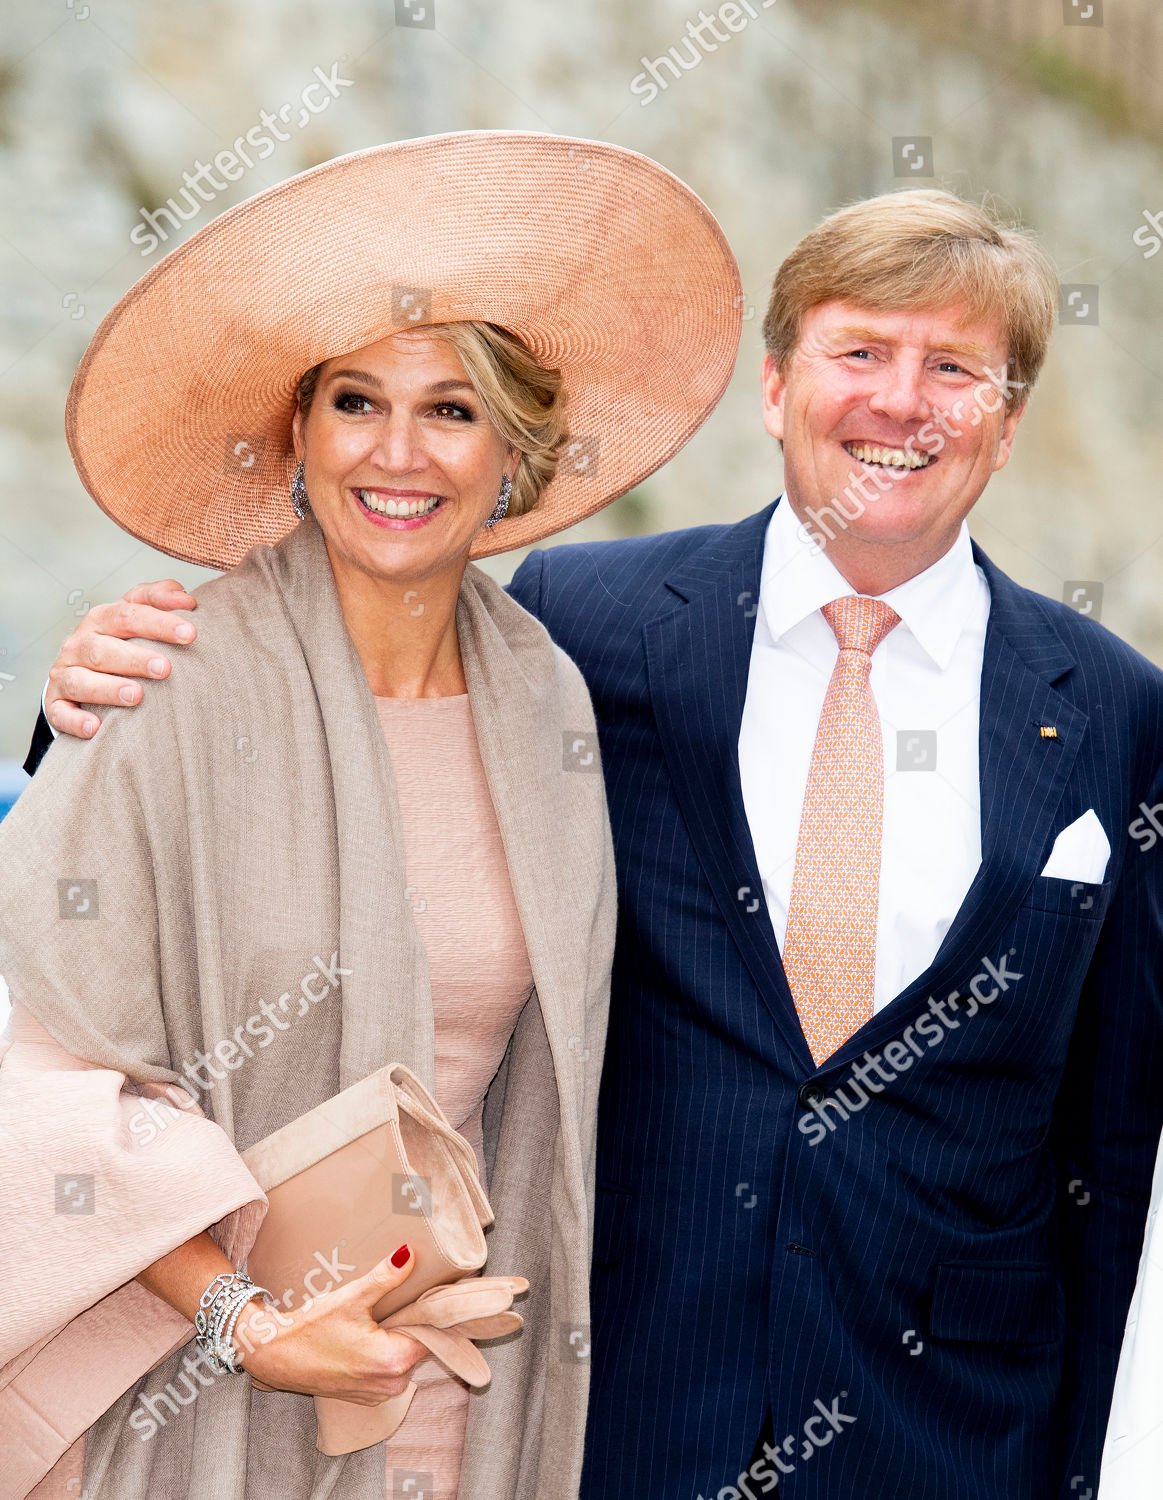 king-willem-alexander-and-queen-maxima-visit-to-germany-shutterstock-editorial-10243489cp.jpg